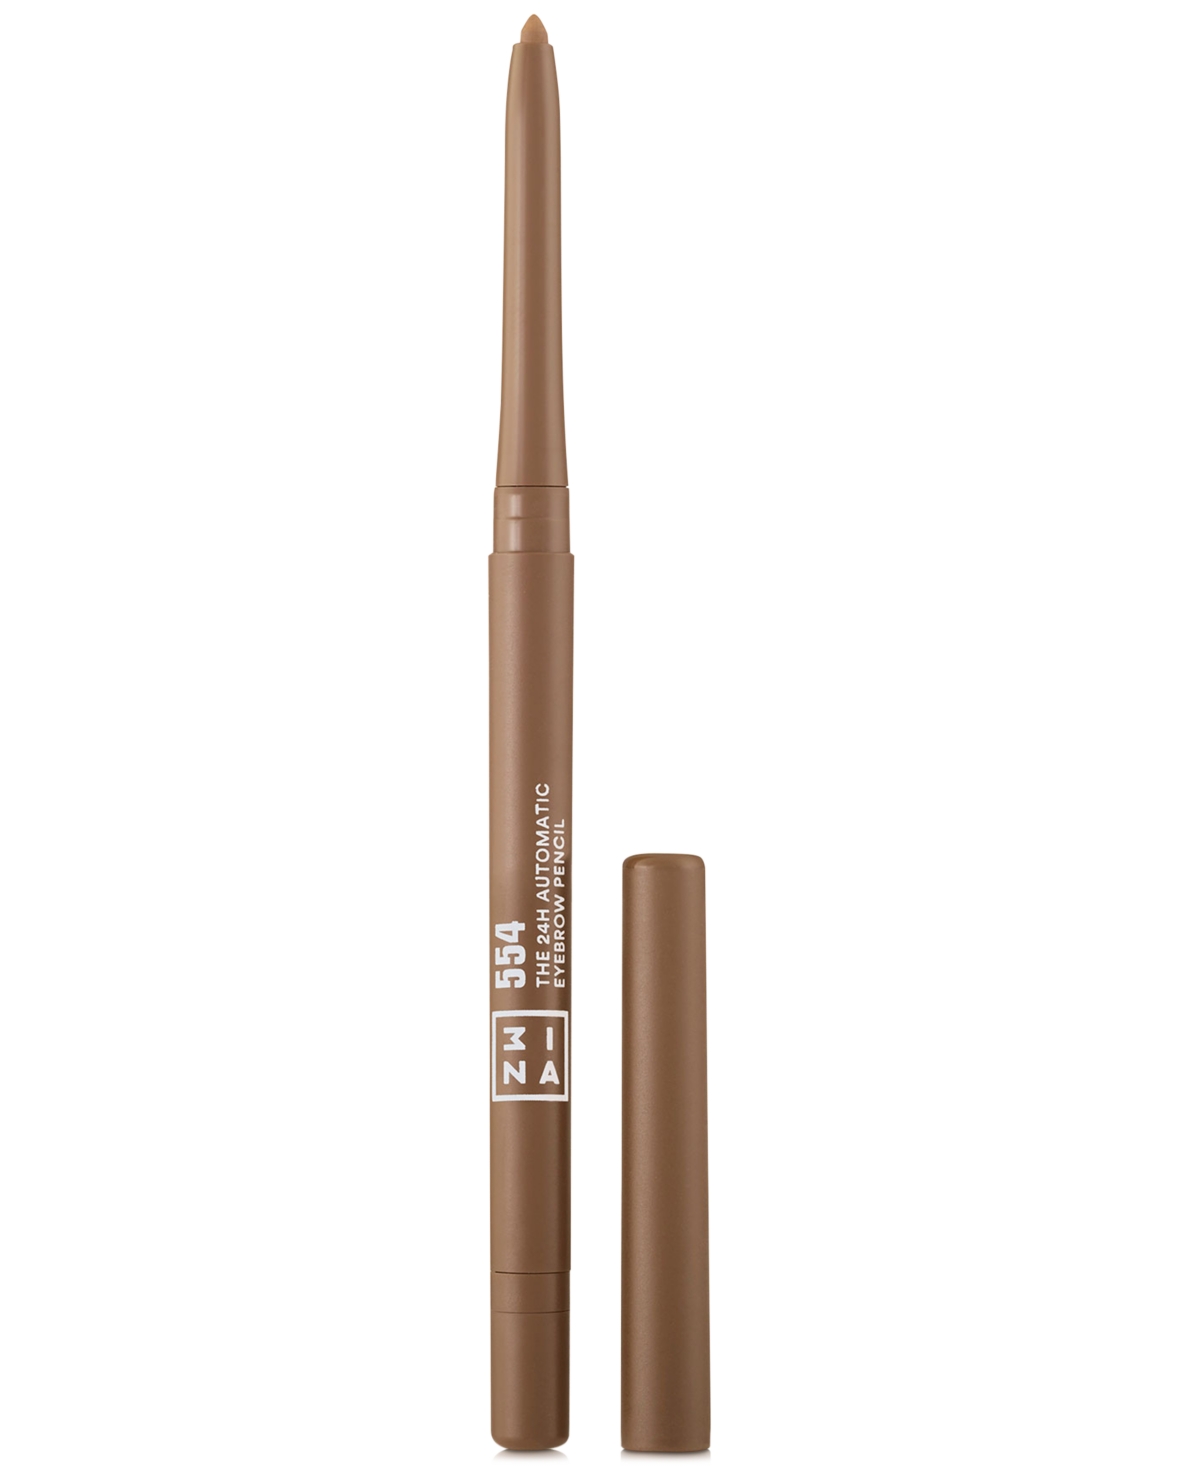 The 24H Automatic Eyebrow Pencil - Dark Brown